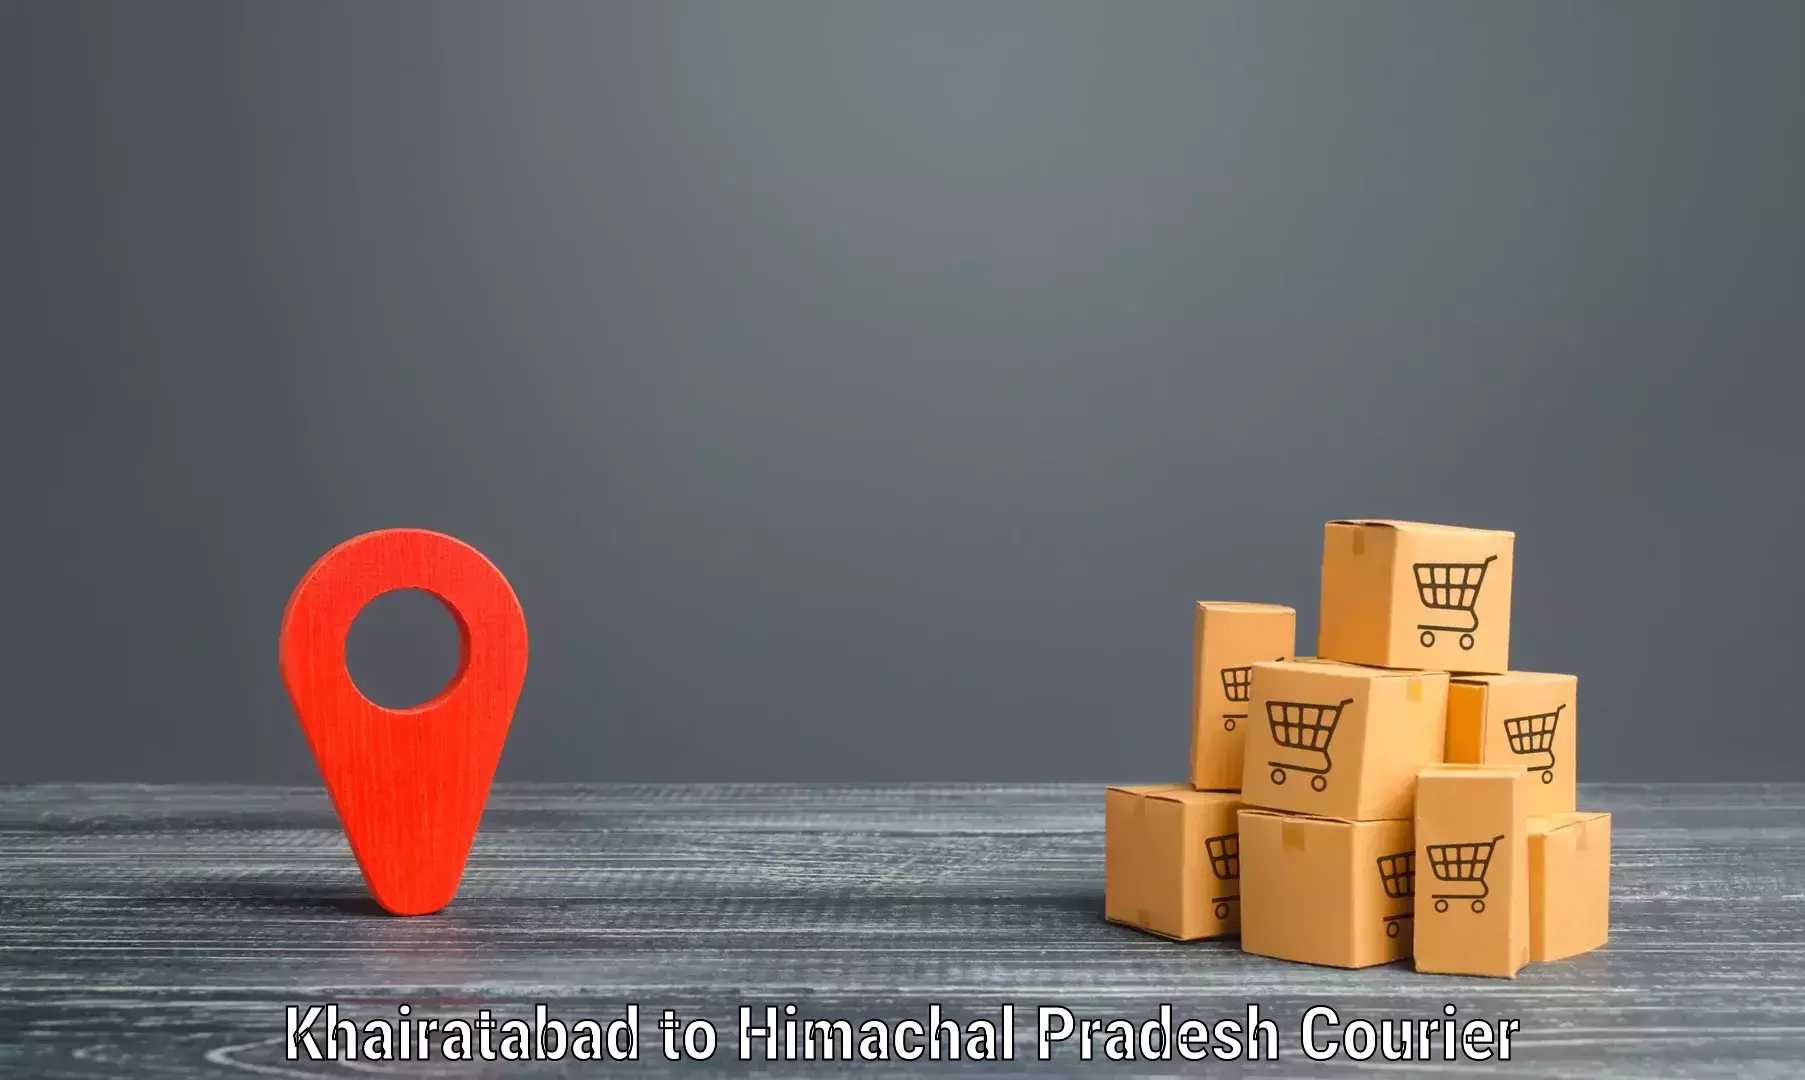 Subscription-based courier Khairatabad to Banjar